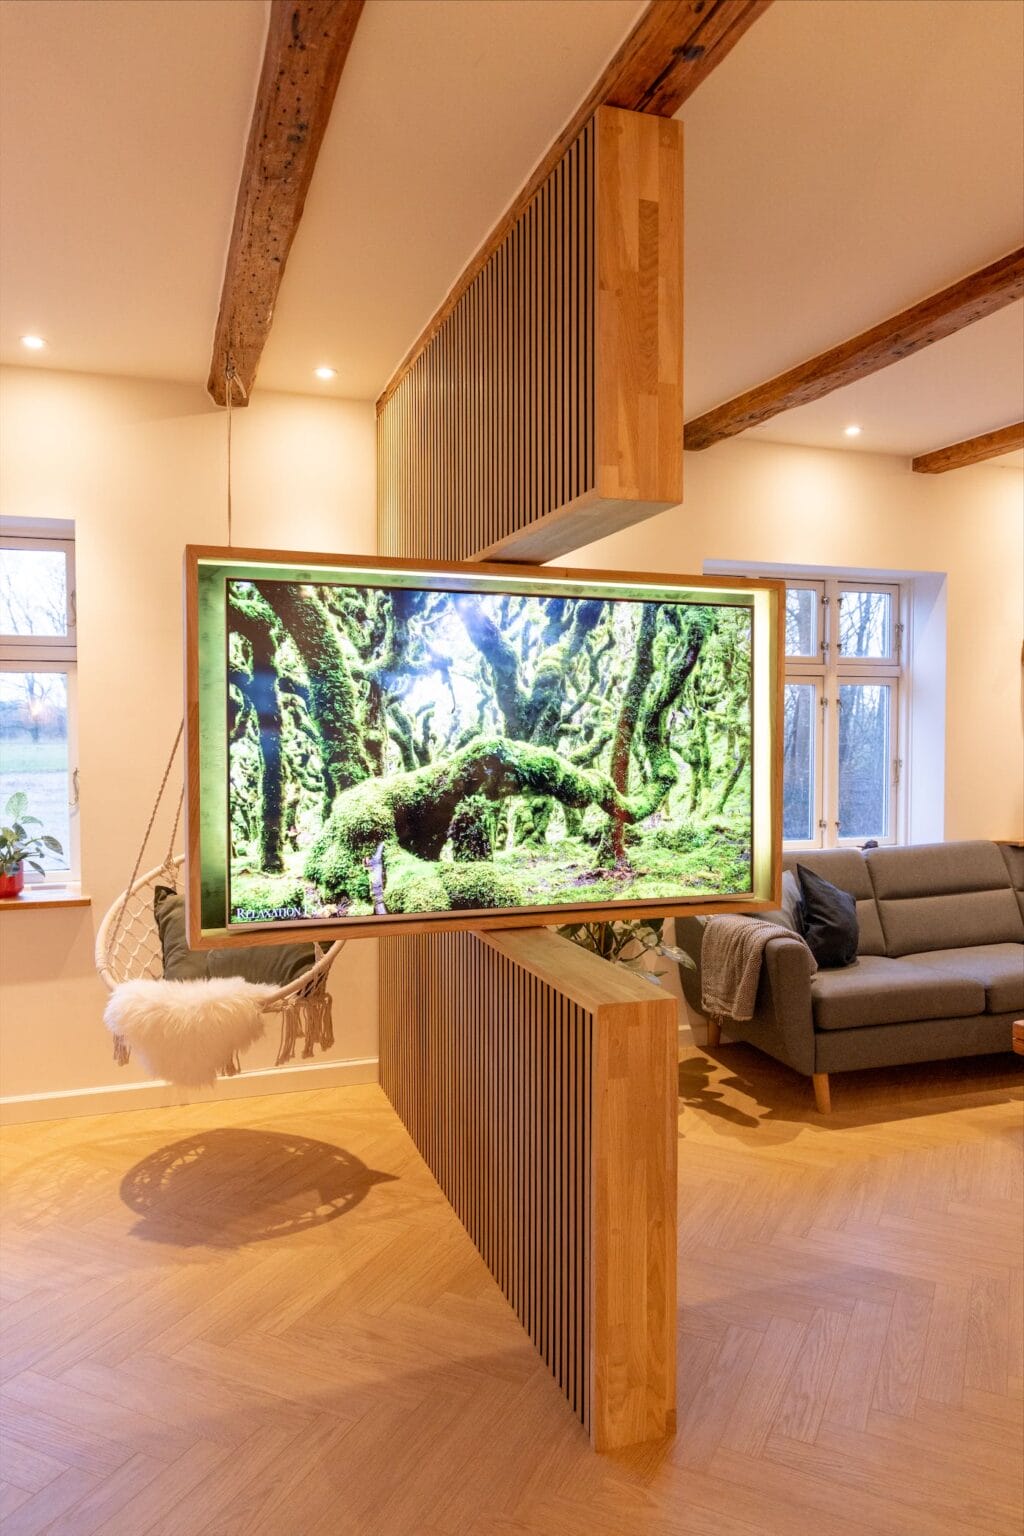 Modern living room with large nature-themed TV display.